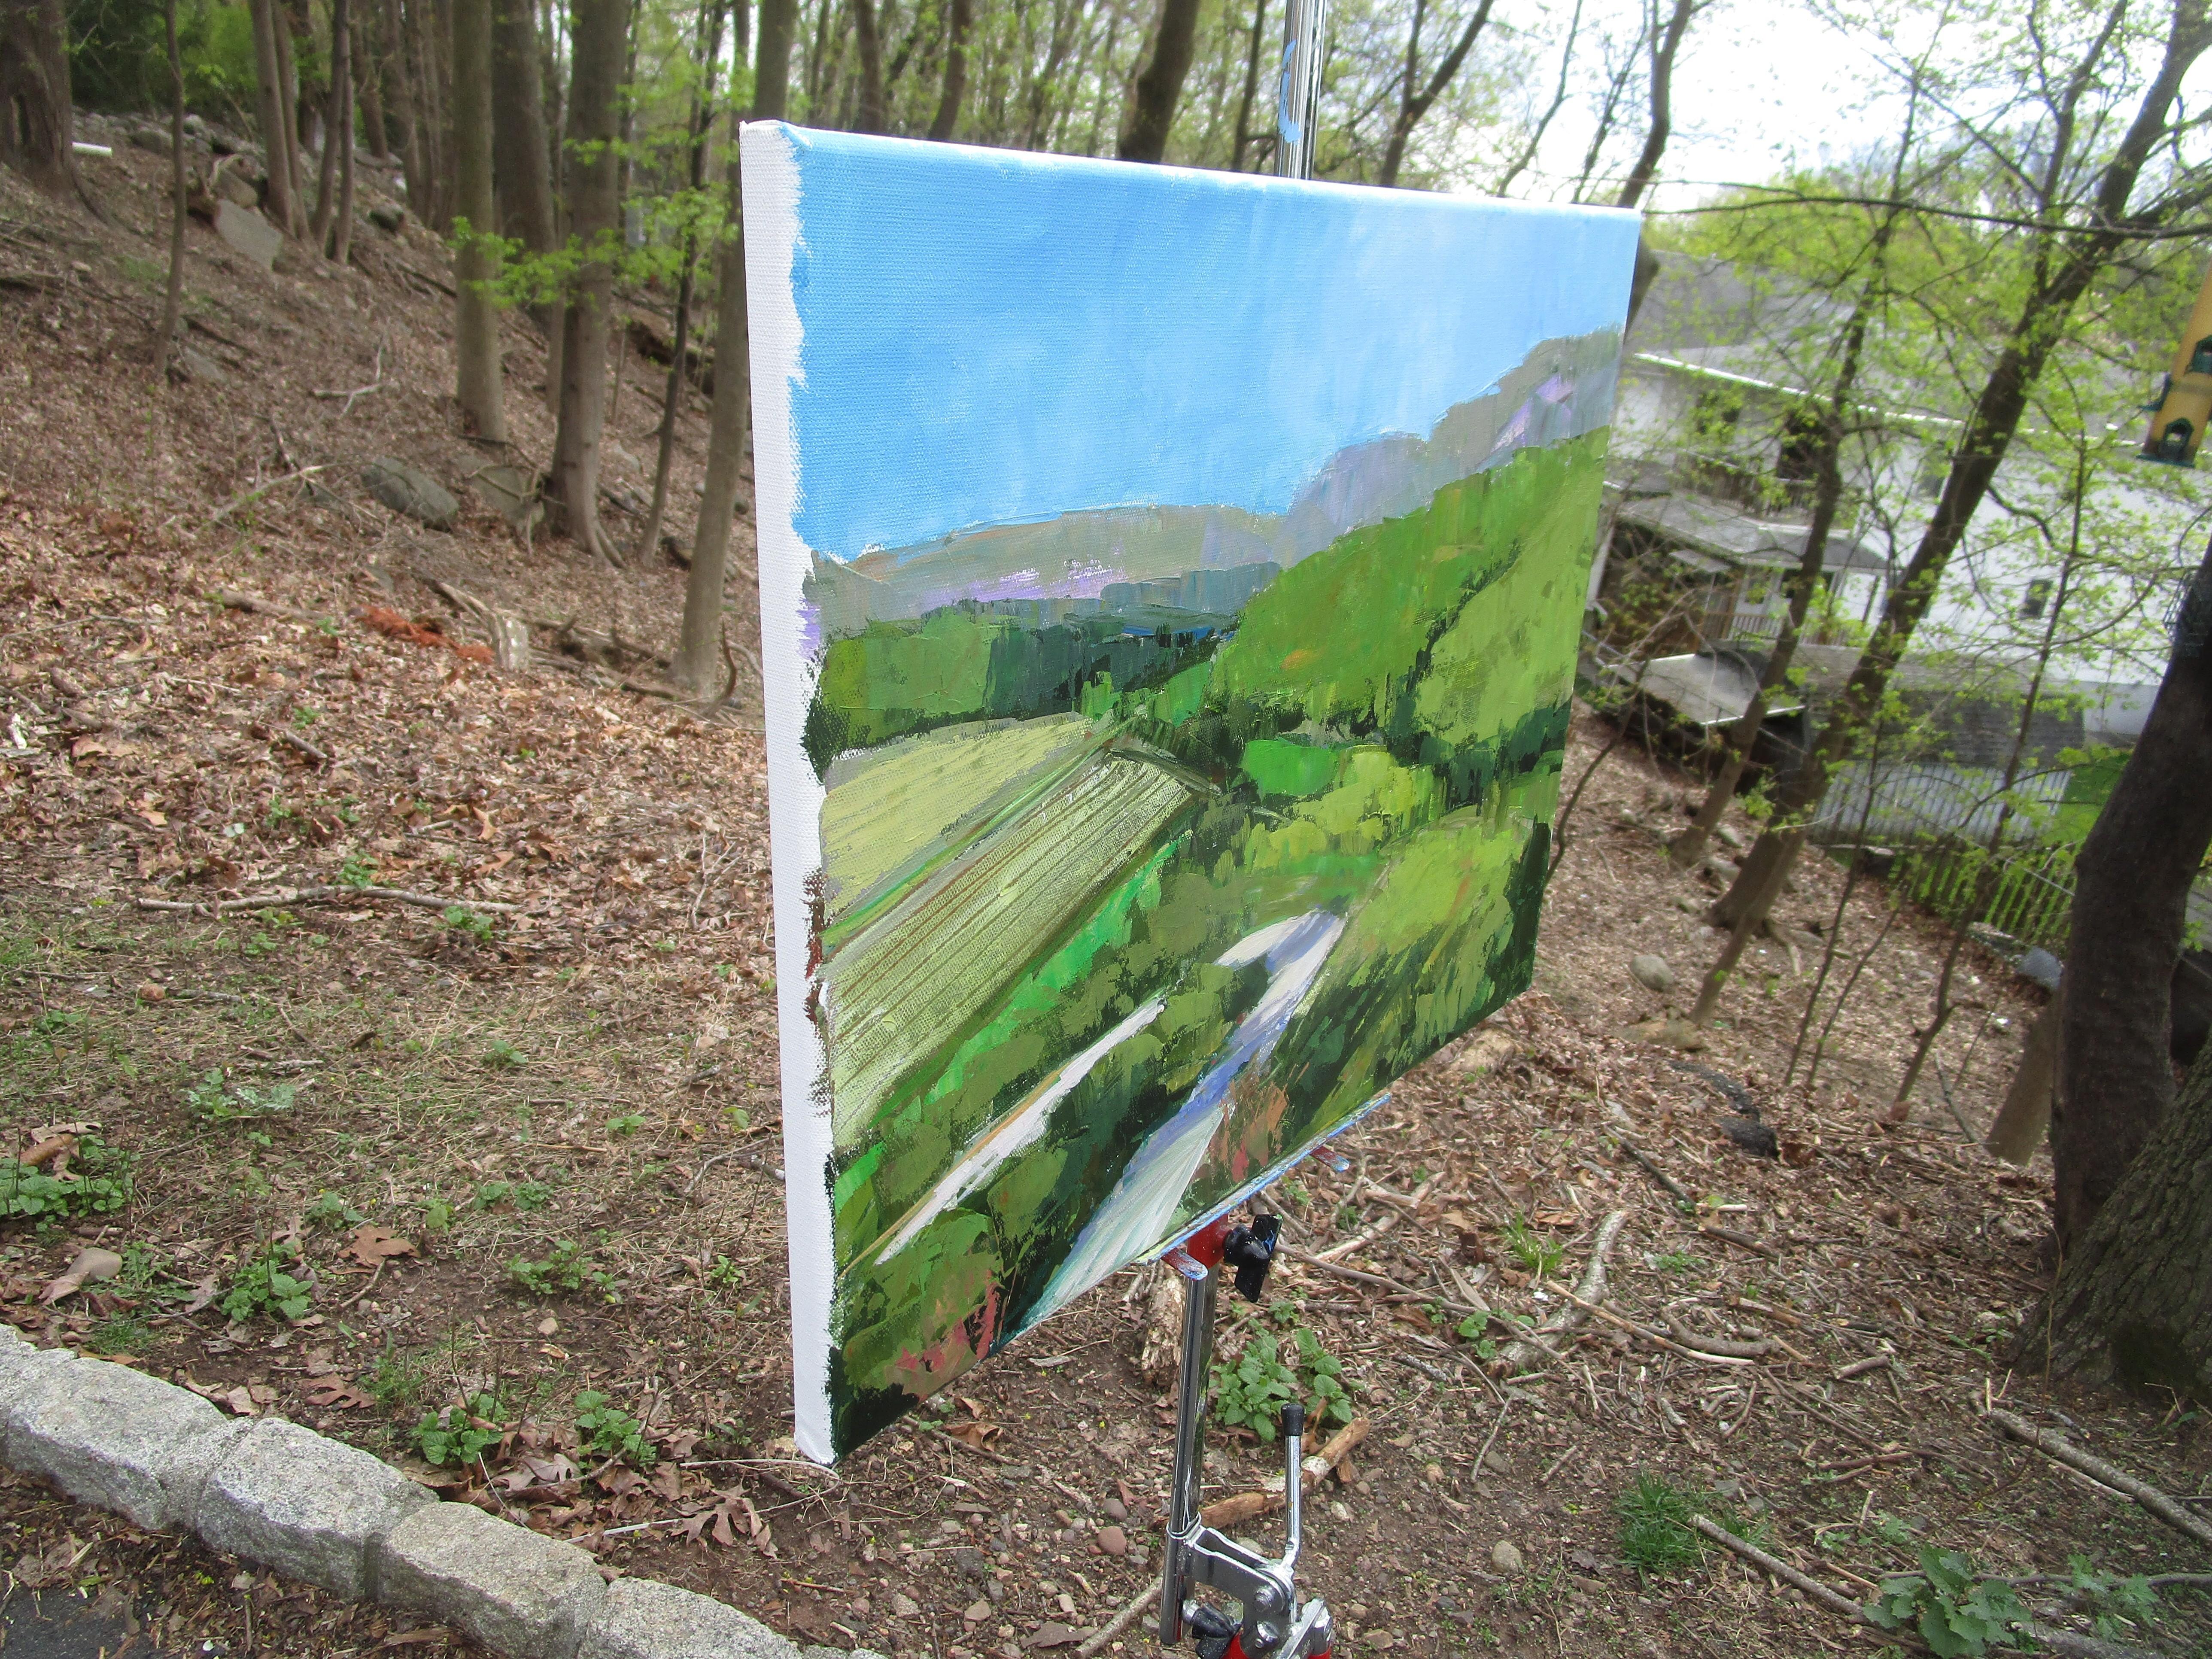 <p>Artist Comments<br>An aerial view reveals a picturesque landscape of the South of France, with verdant greenery and farmland hugging a winding switchback road. While a zigzag path on a steep hill may cause unease, it offers a stunning vista from